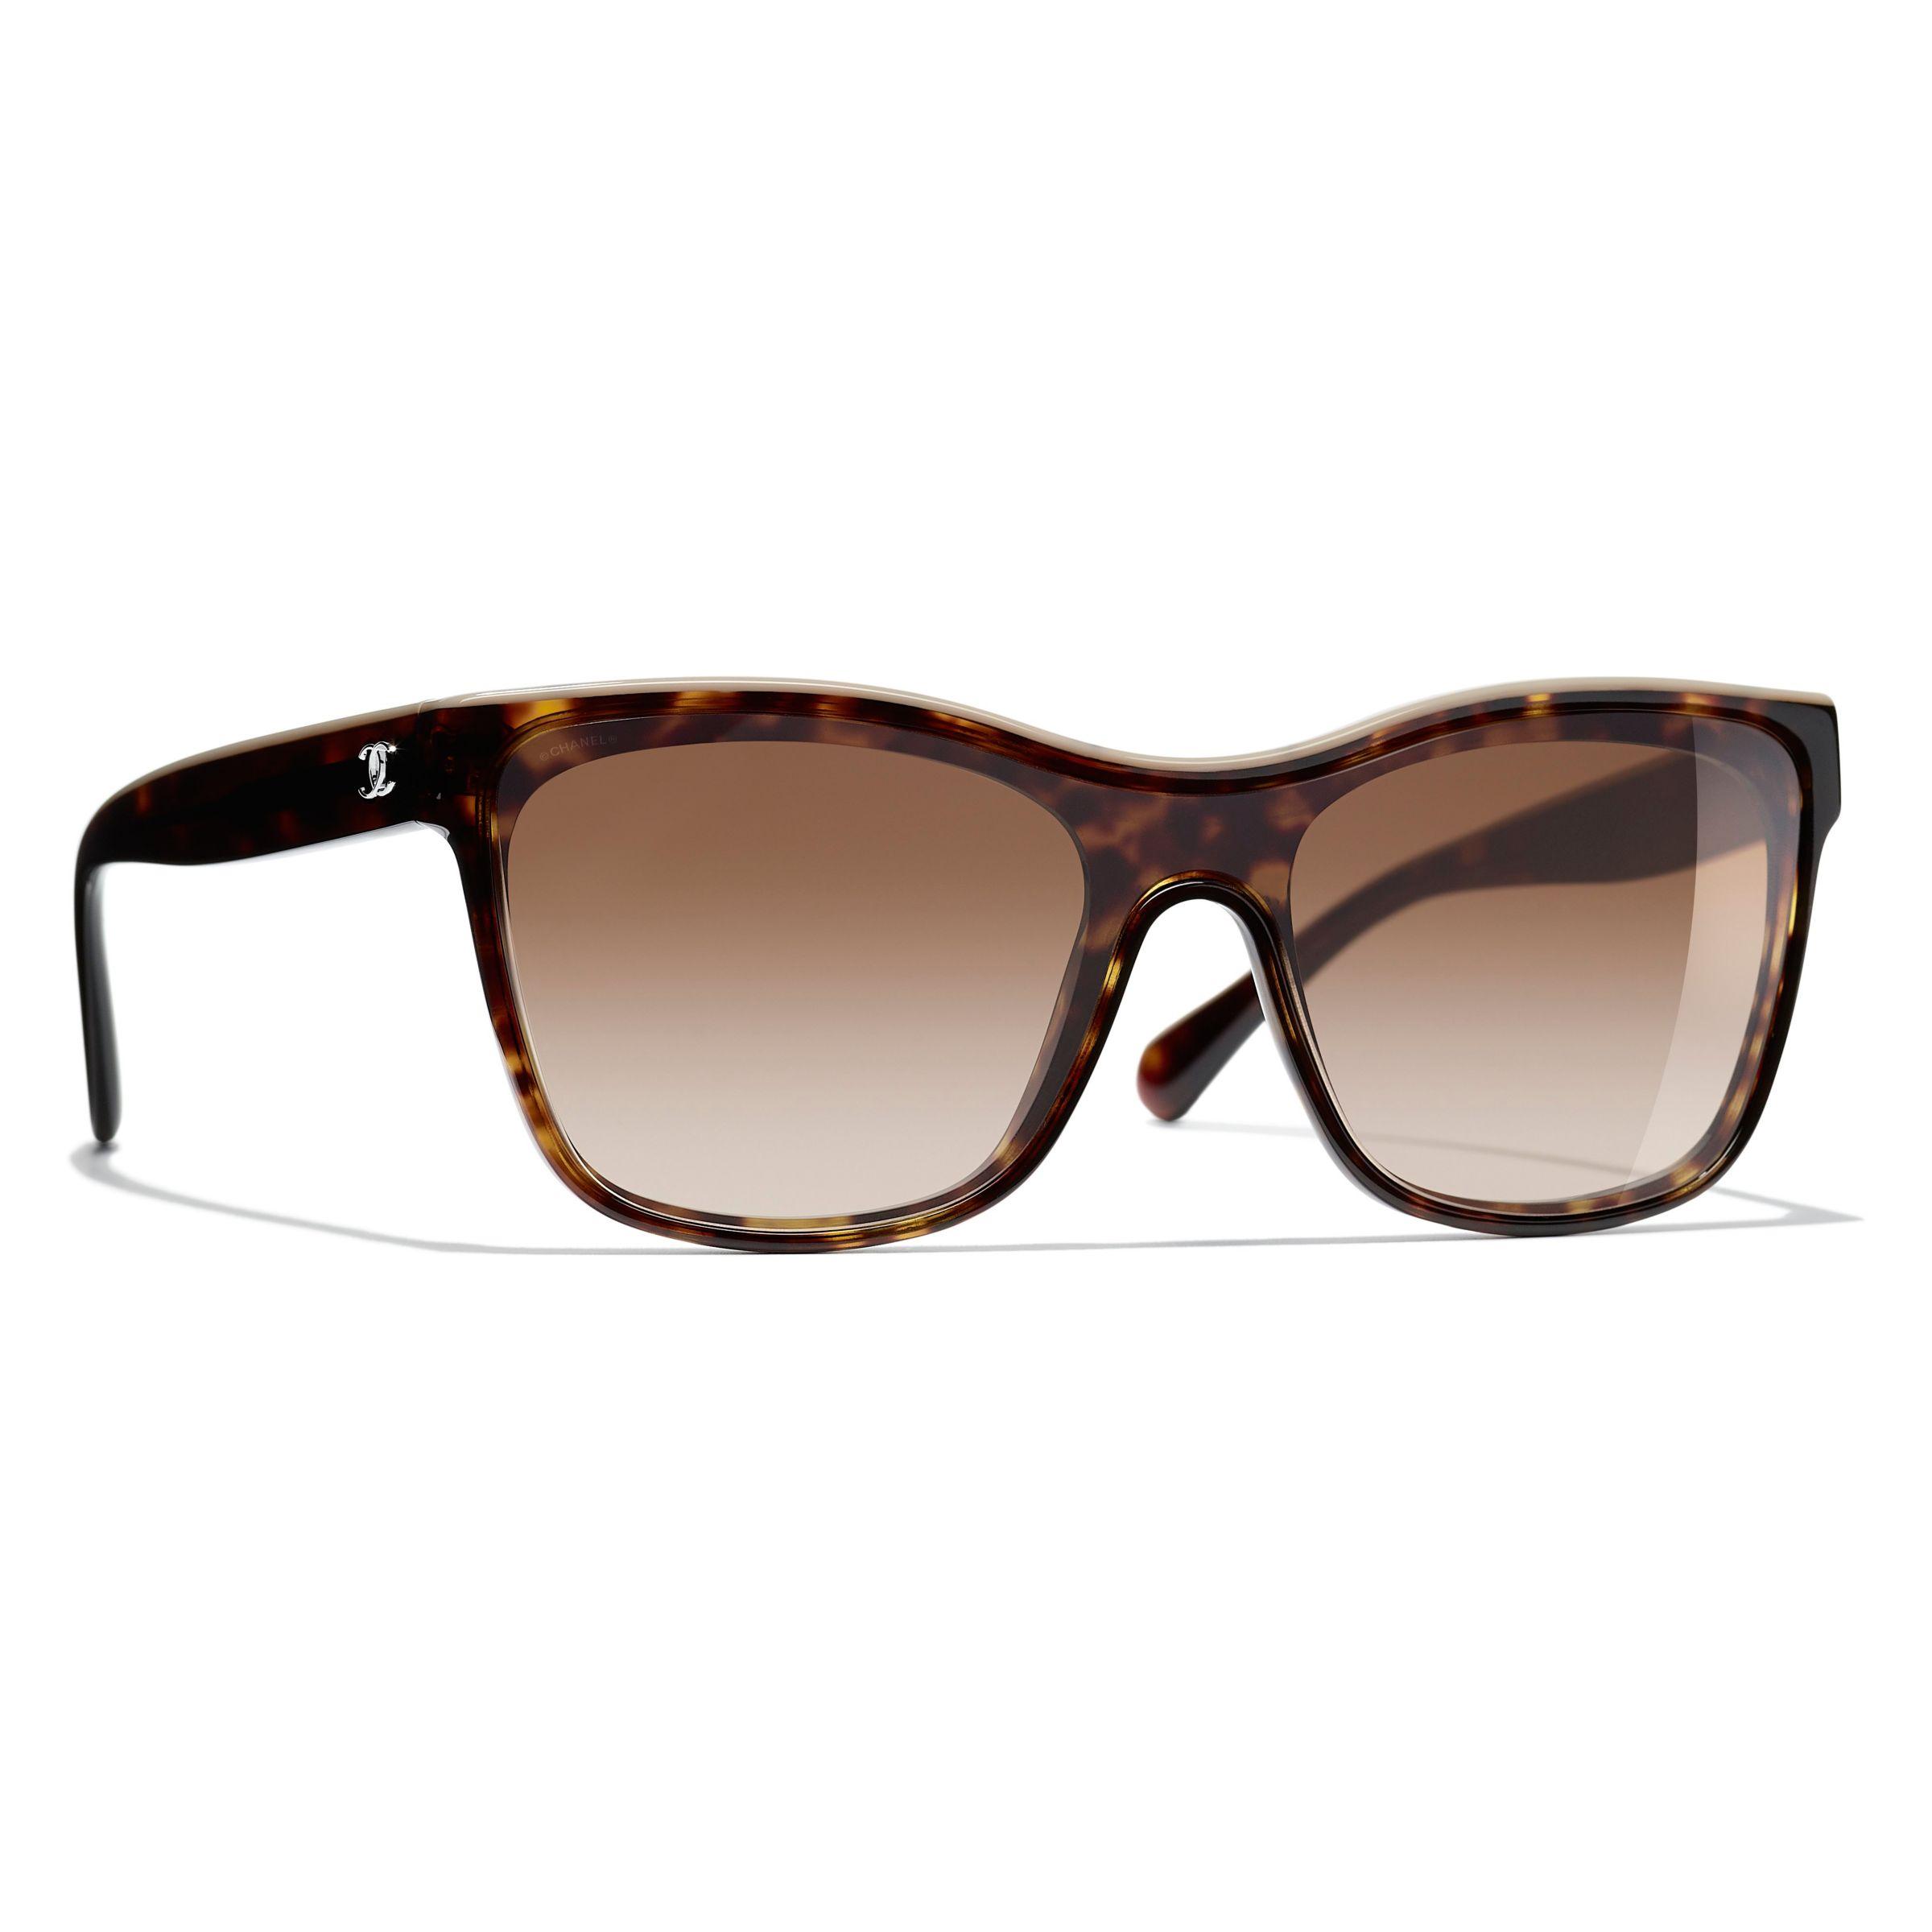 CHANEL Oval Sunglasses CH5414 Black/Grey at John Lewis & Partners